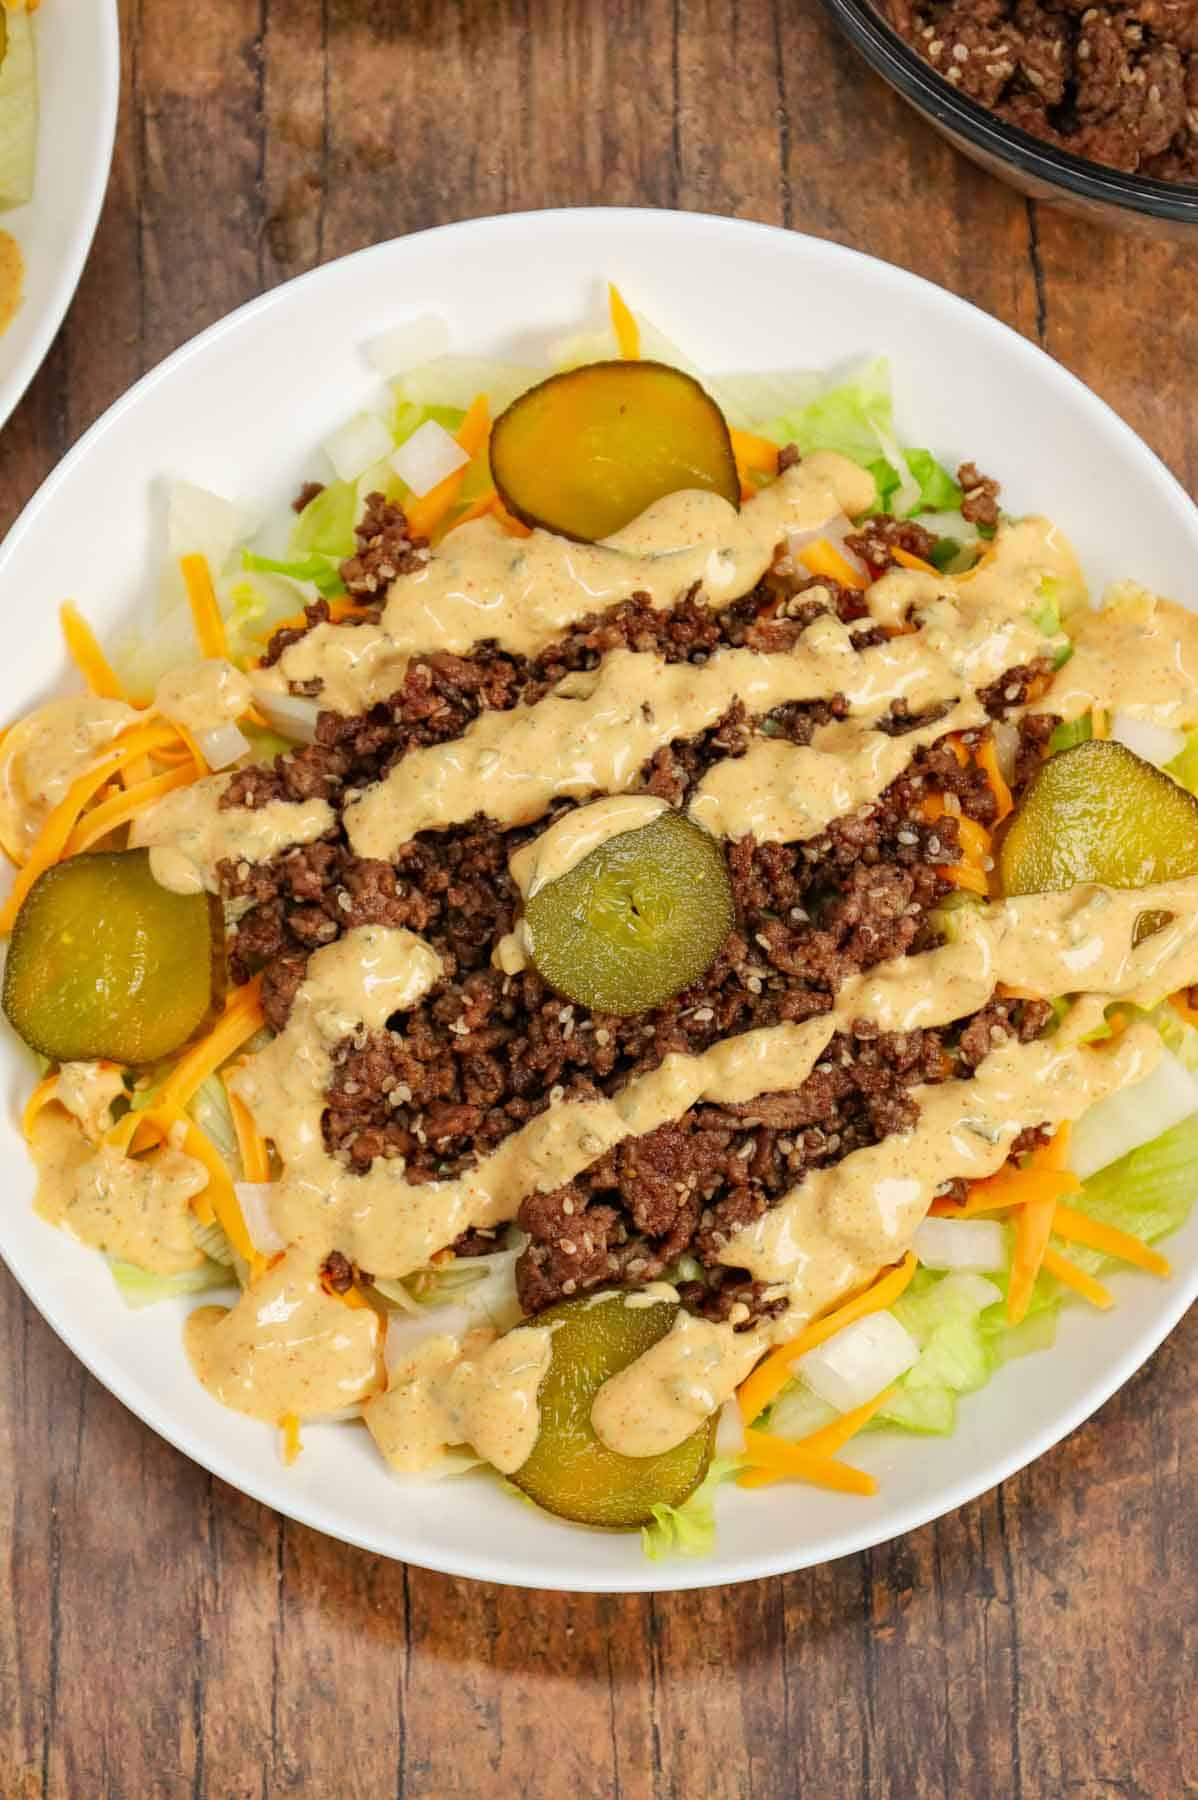 Big Mac Salad is a hearty dinner recipe loaded with ground beef, shredded cheddar cheese, iceberg lettuce, diced onions, dill pickles, sesame seeds and a homemade Big Mac sauce.